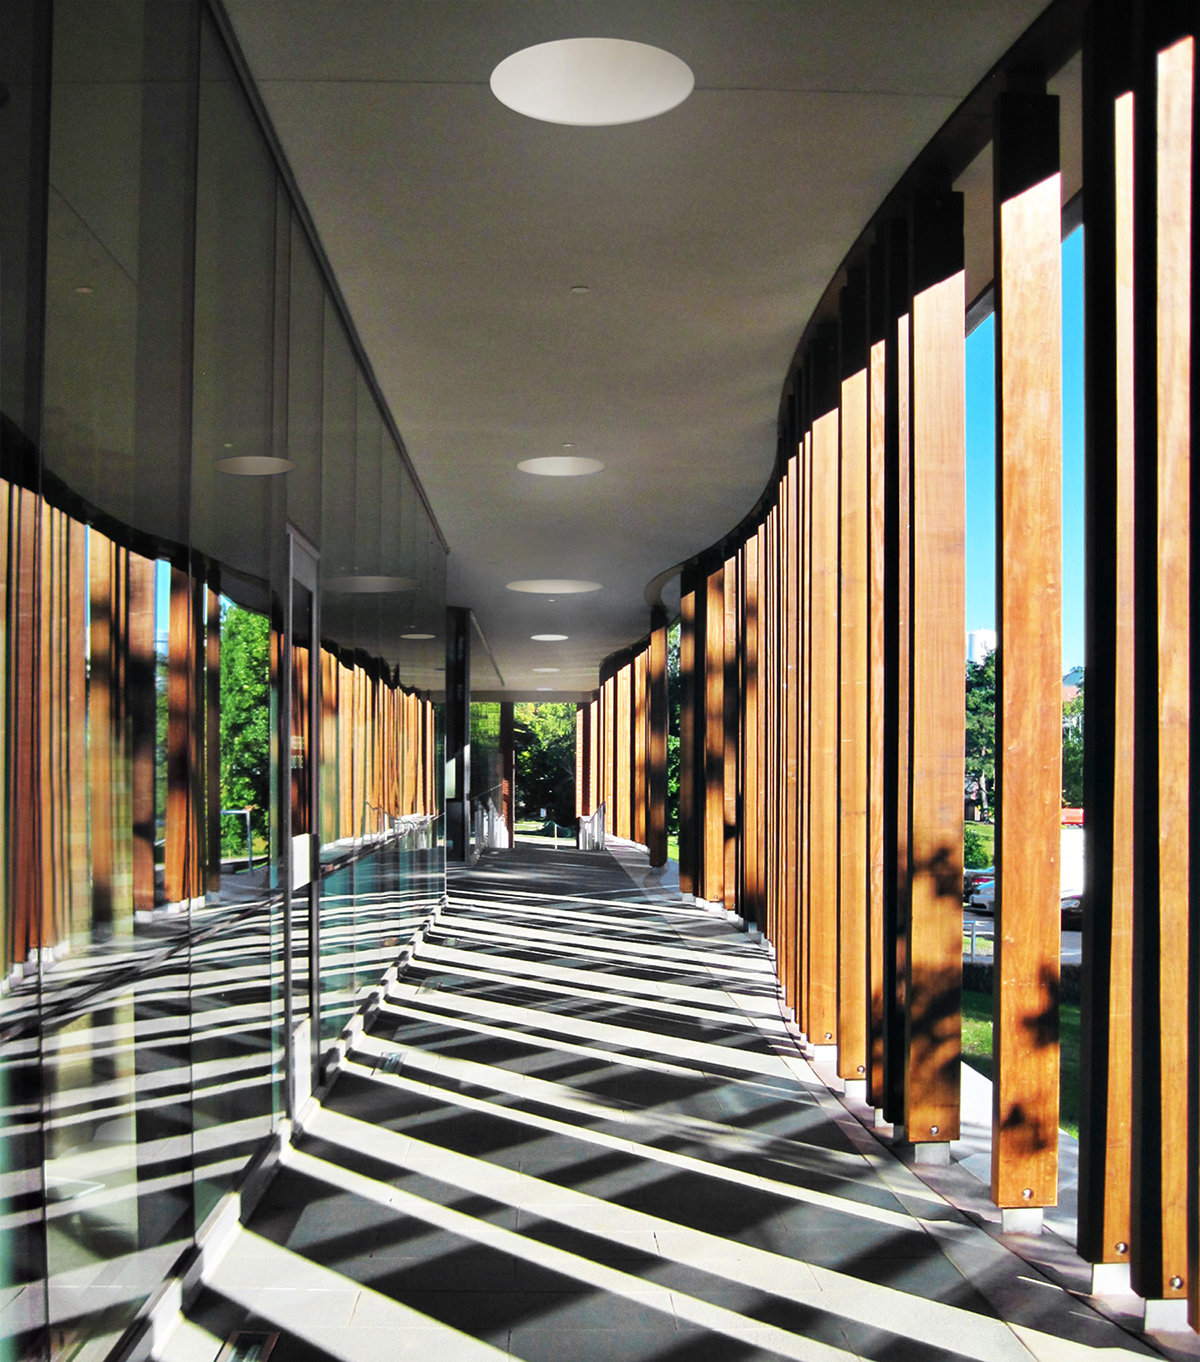 2 tskp university of connecticut widmer wing school of nursing interior detail hallway with walls of windows and design elements 1400 xxx q85